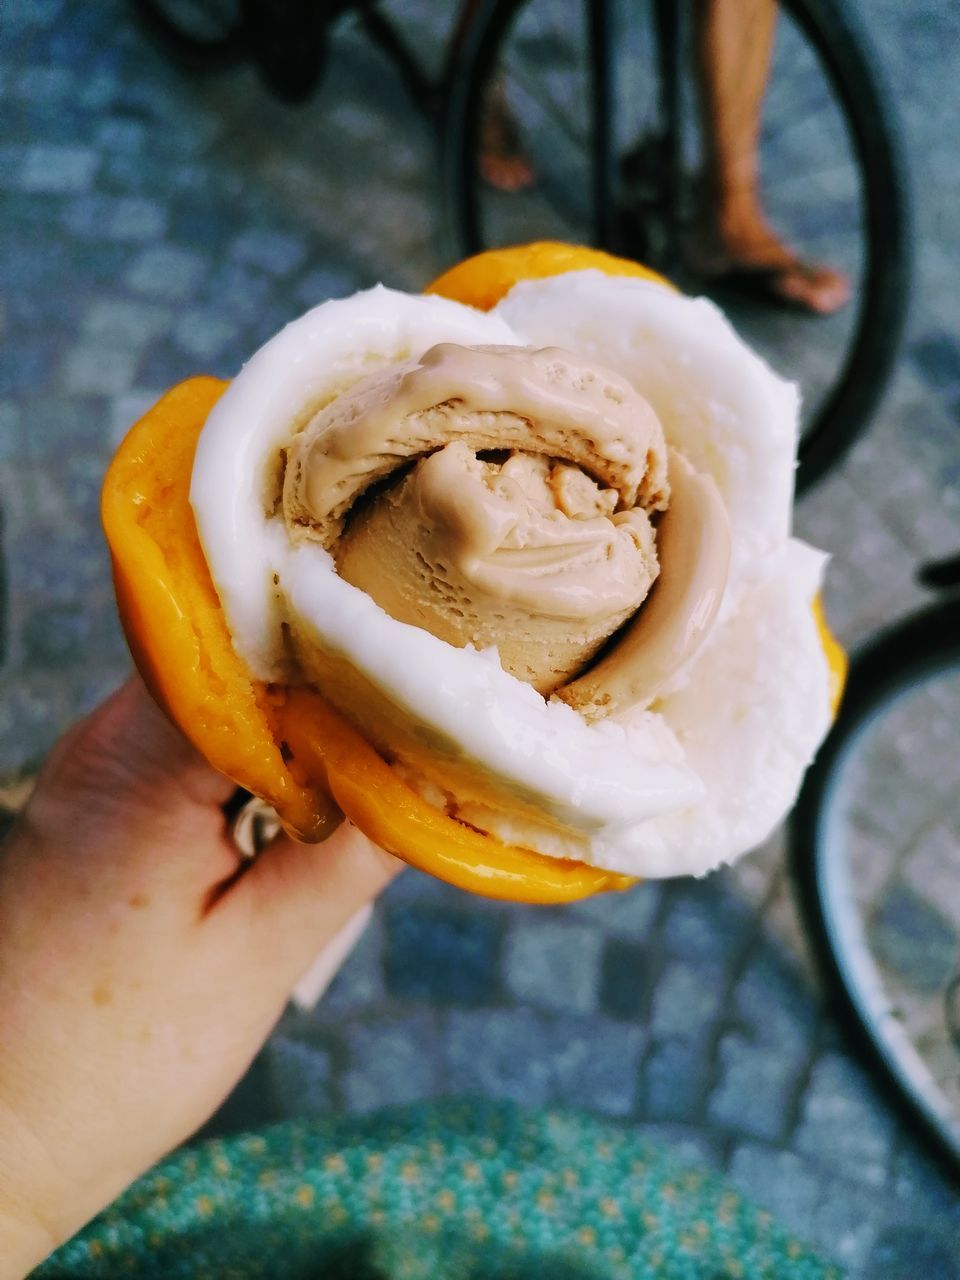 CROPPED IMAGE OF PERSON HOLDING ICE CREAM